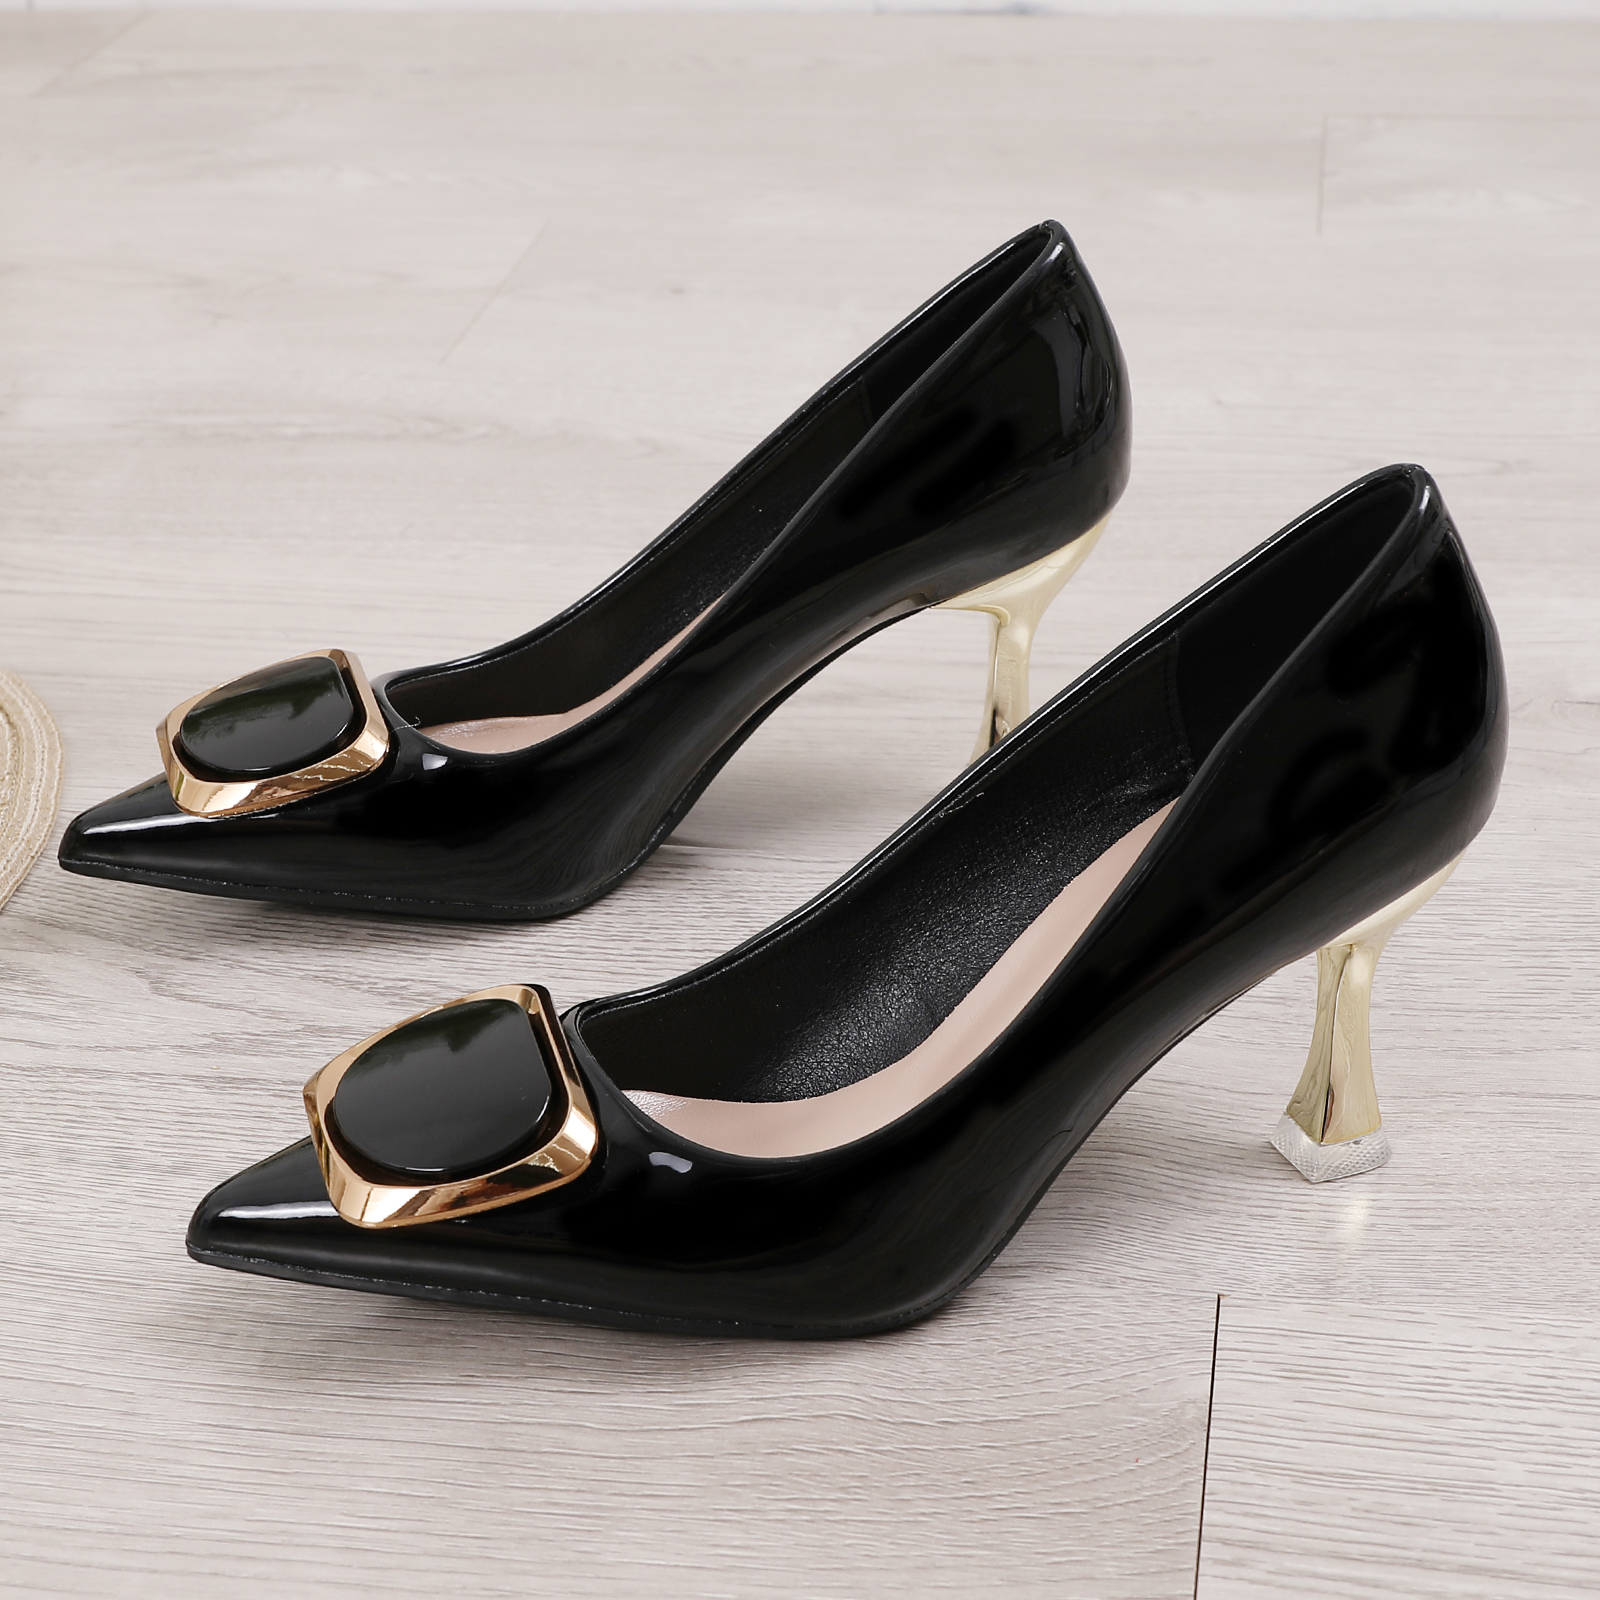 Women's Metallic Buckle Decor Pumps, Pointed Toe Patent Leather